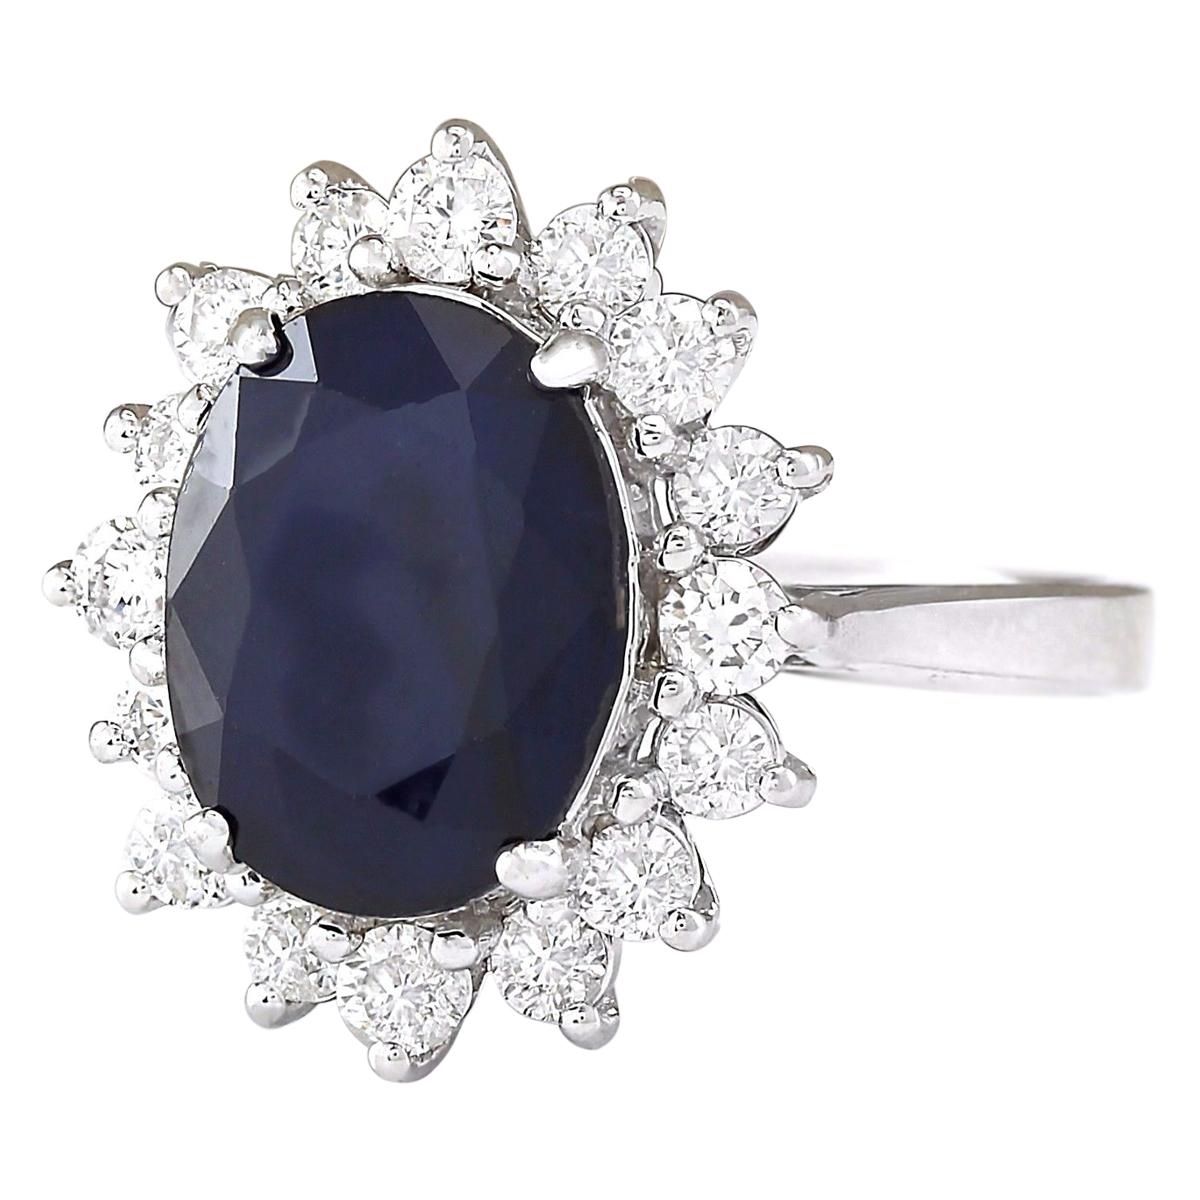 Stamped: 14K White Gold
Total Ring Weight: 8.6 Grams
Total Natural Sapphire Weight is 5.52 Carat (Measures: 11.00x9.00 mm)
Color: Blue
Total Natural Diamond Weight is 0.90 Carat
Color: F-G, Clarity: VS2-SI1
Face Measures: 17.80x15.05 mm
Sku: